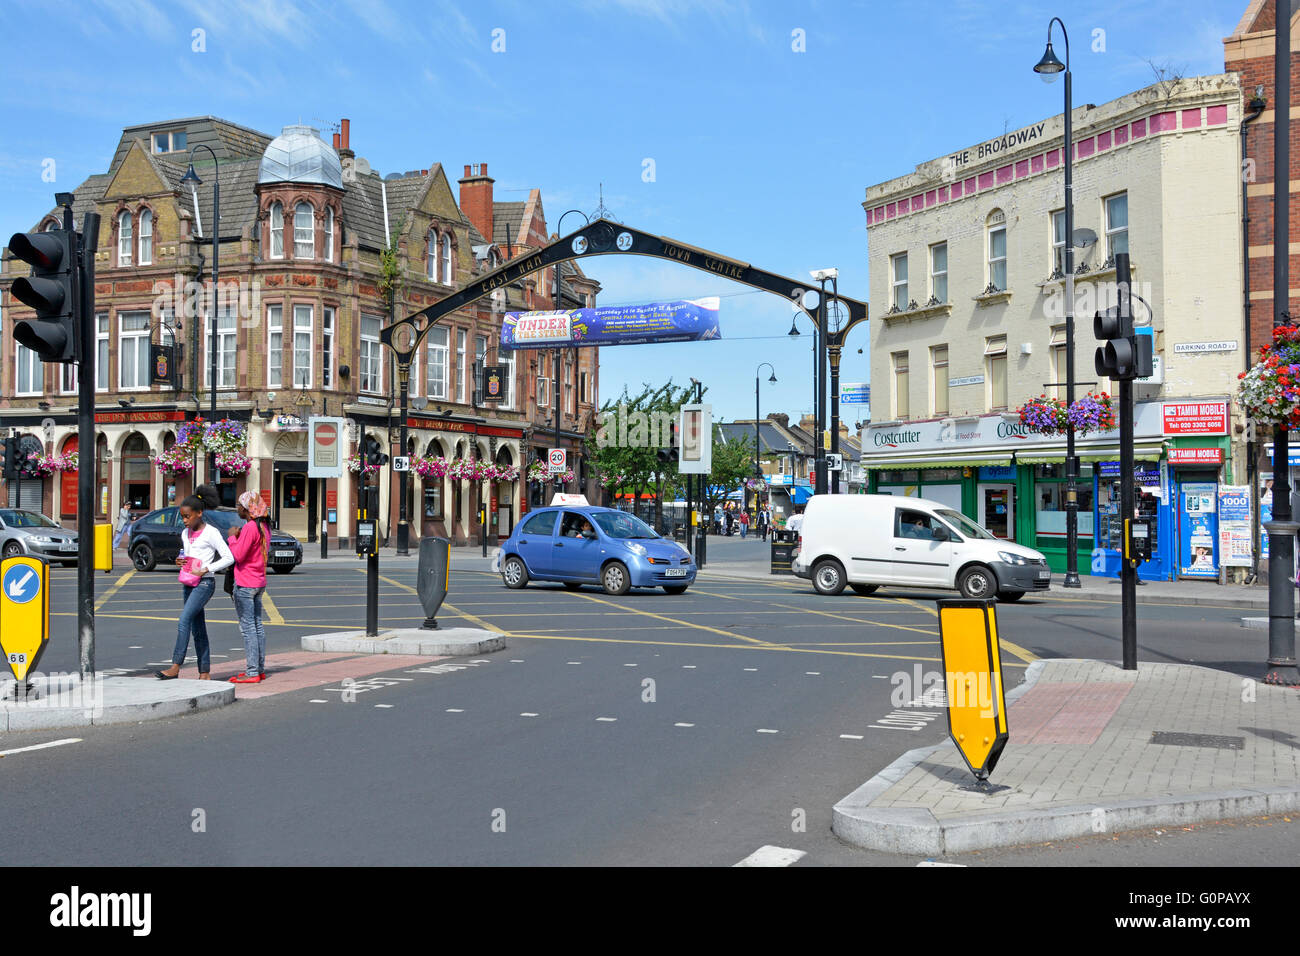 East Ham multicultural London Borough of Newham street scene & arch cars at traffic lights junction of High Street North & Barking Road England UK Stock Photo